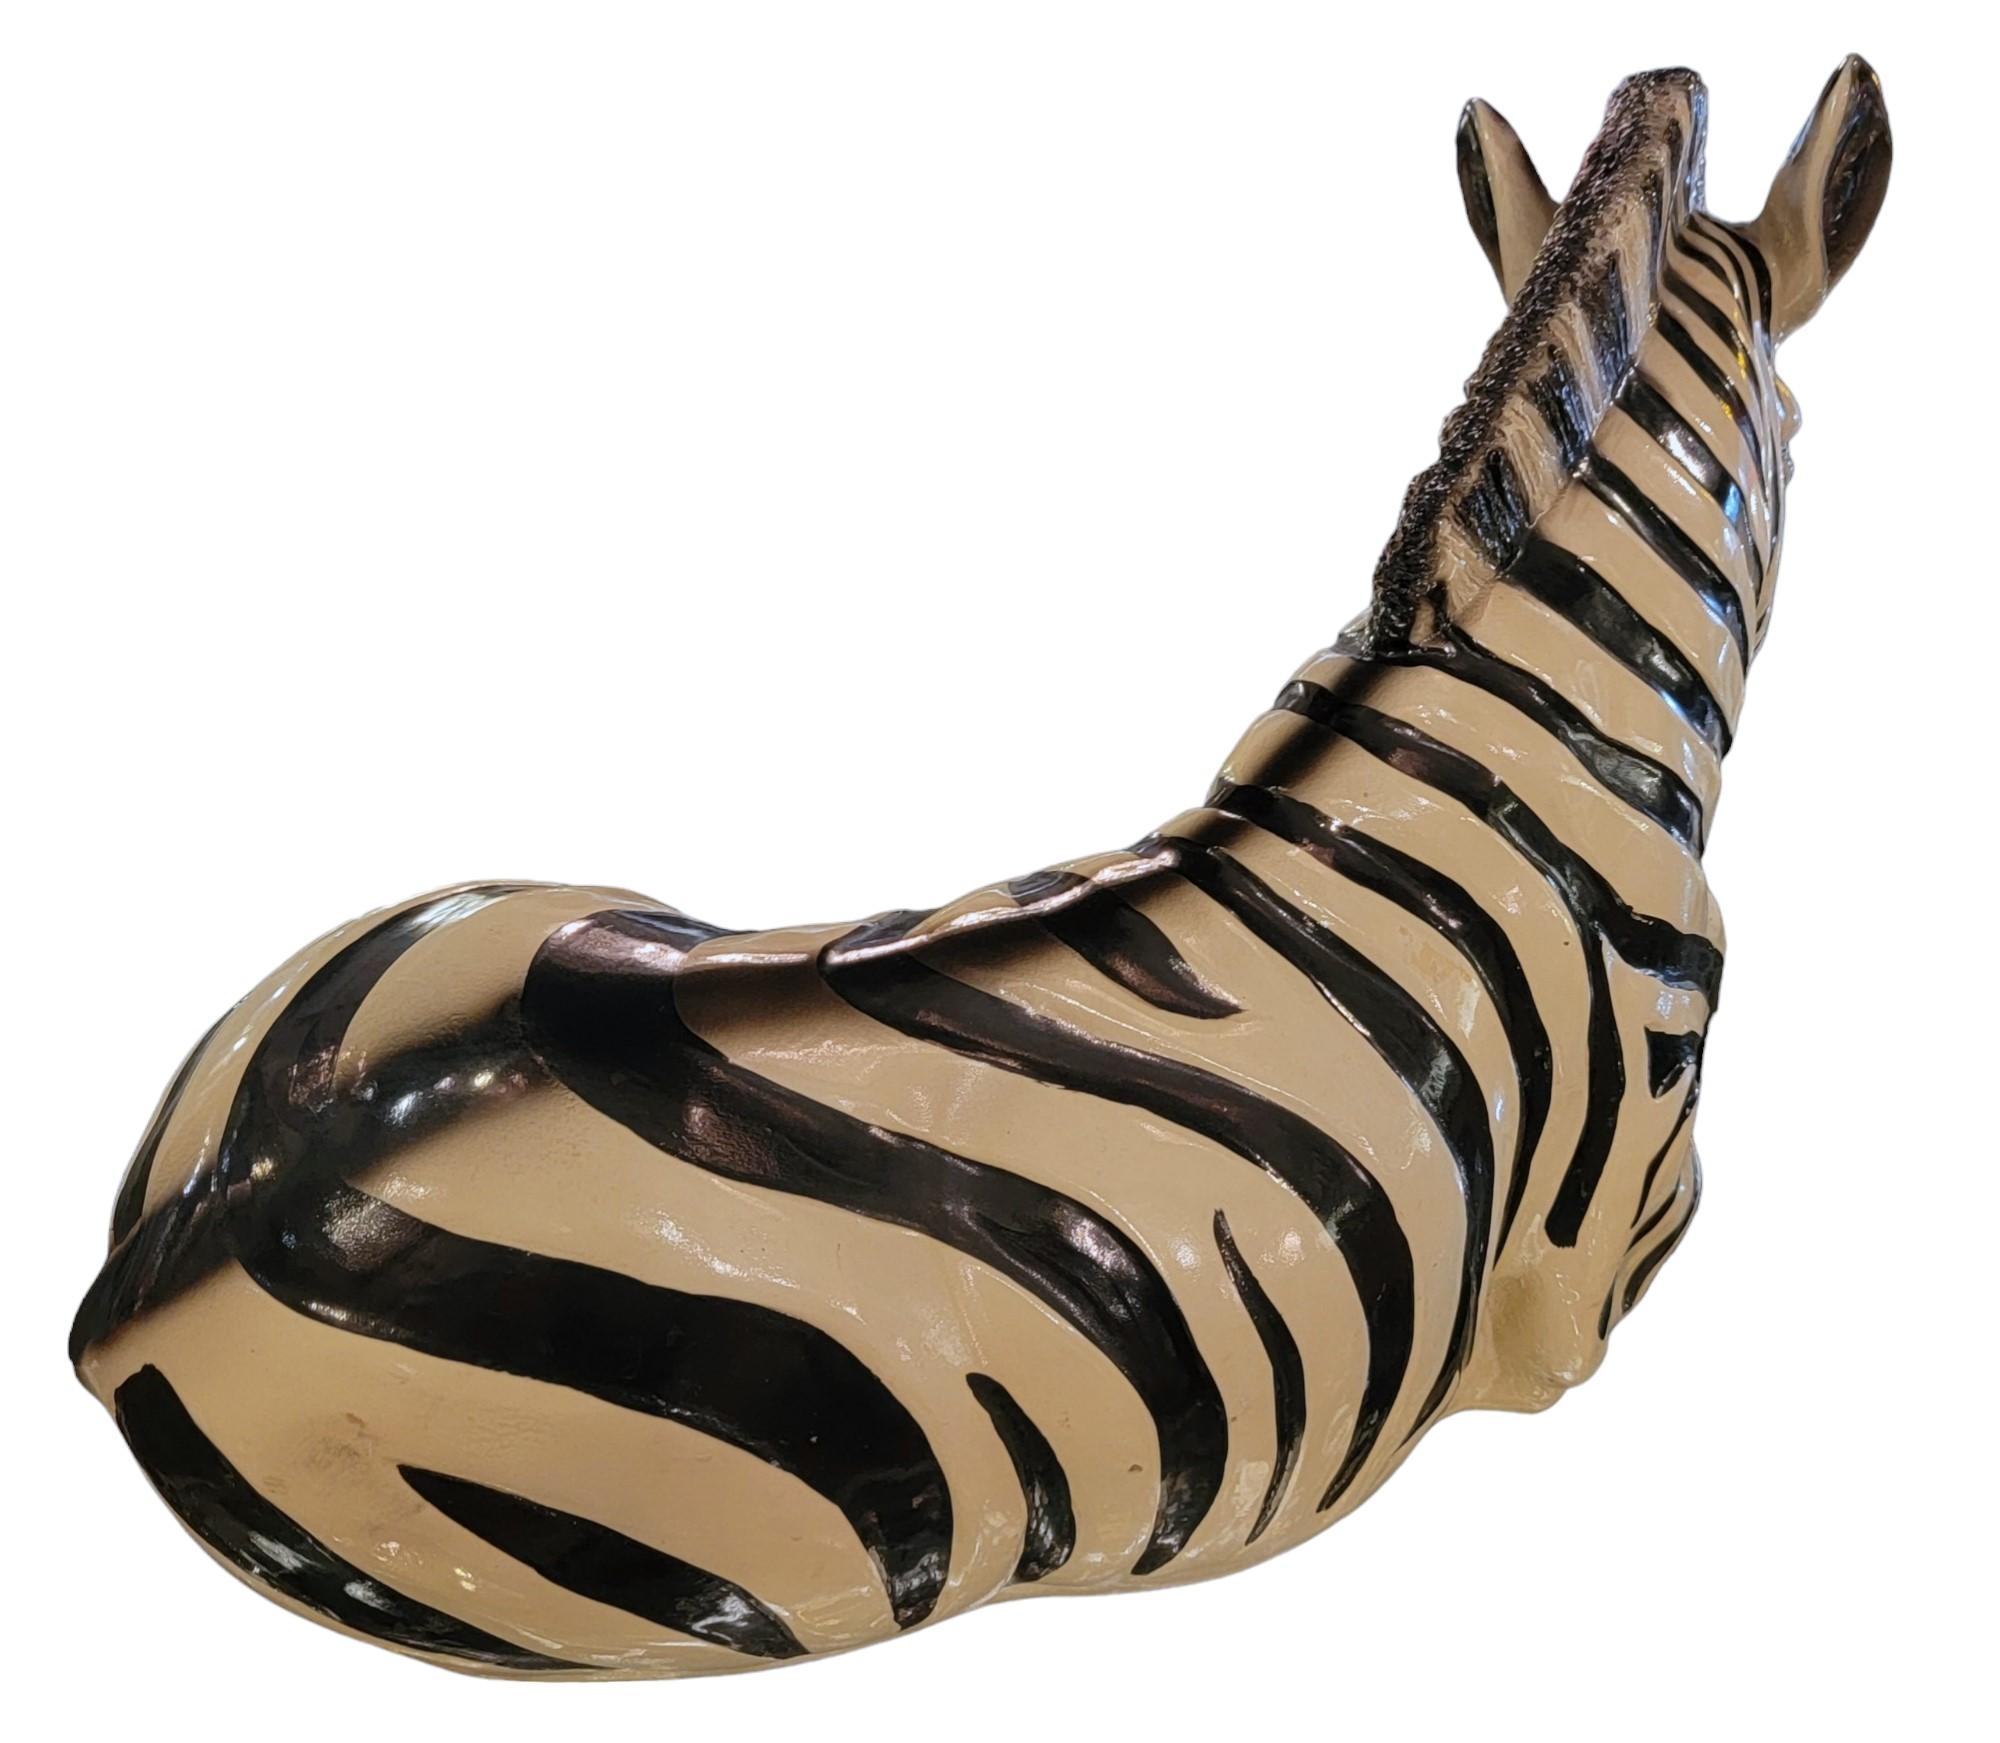 1970s Marwal Industries Baby Resin Zebra Sculpture. Measures approx 26w x 17h x 14d